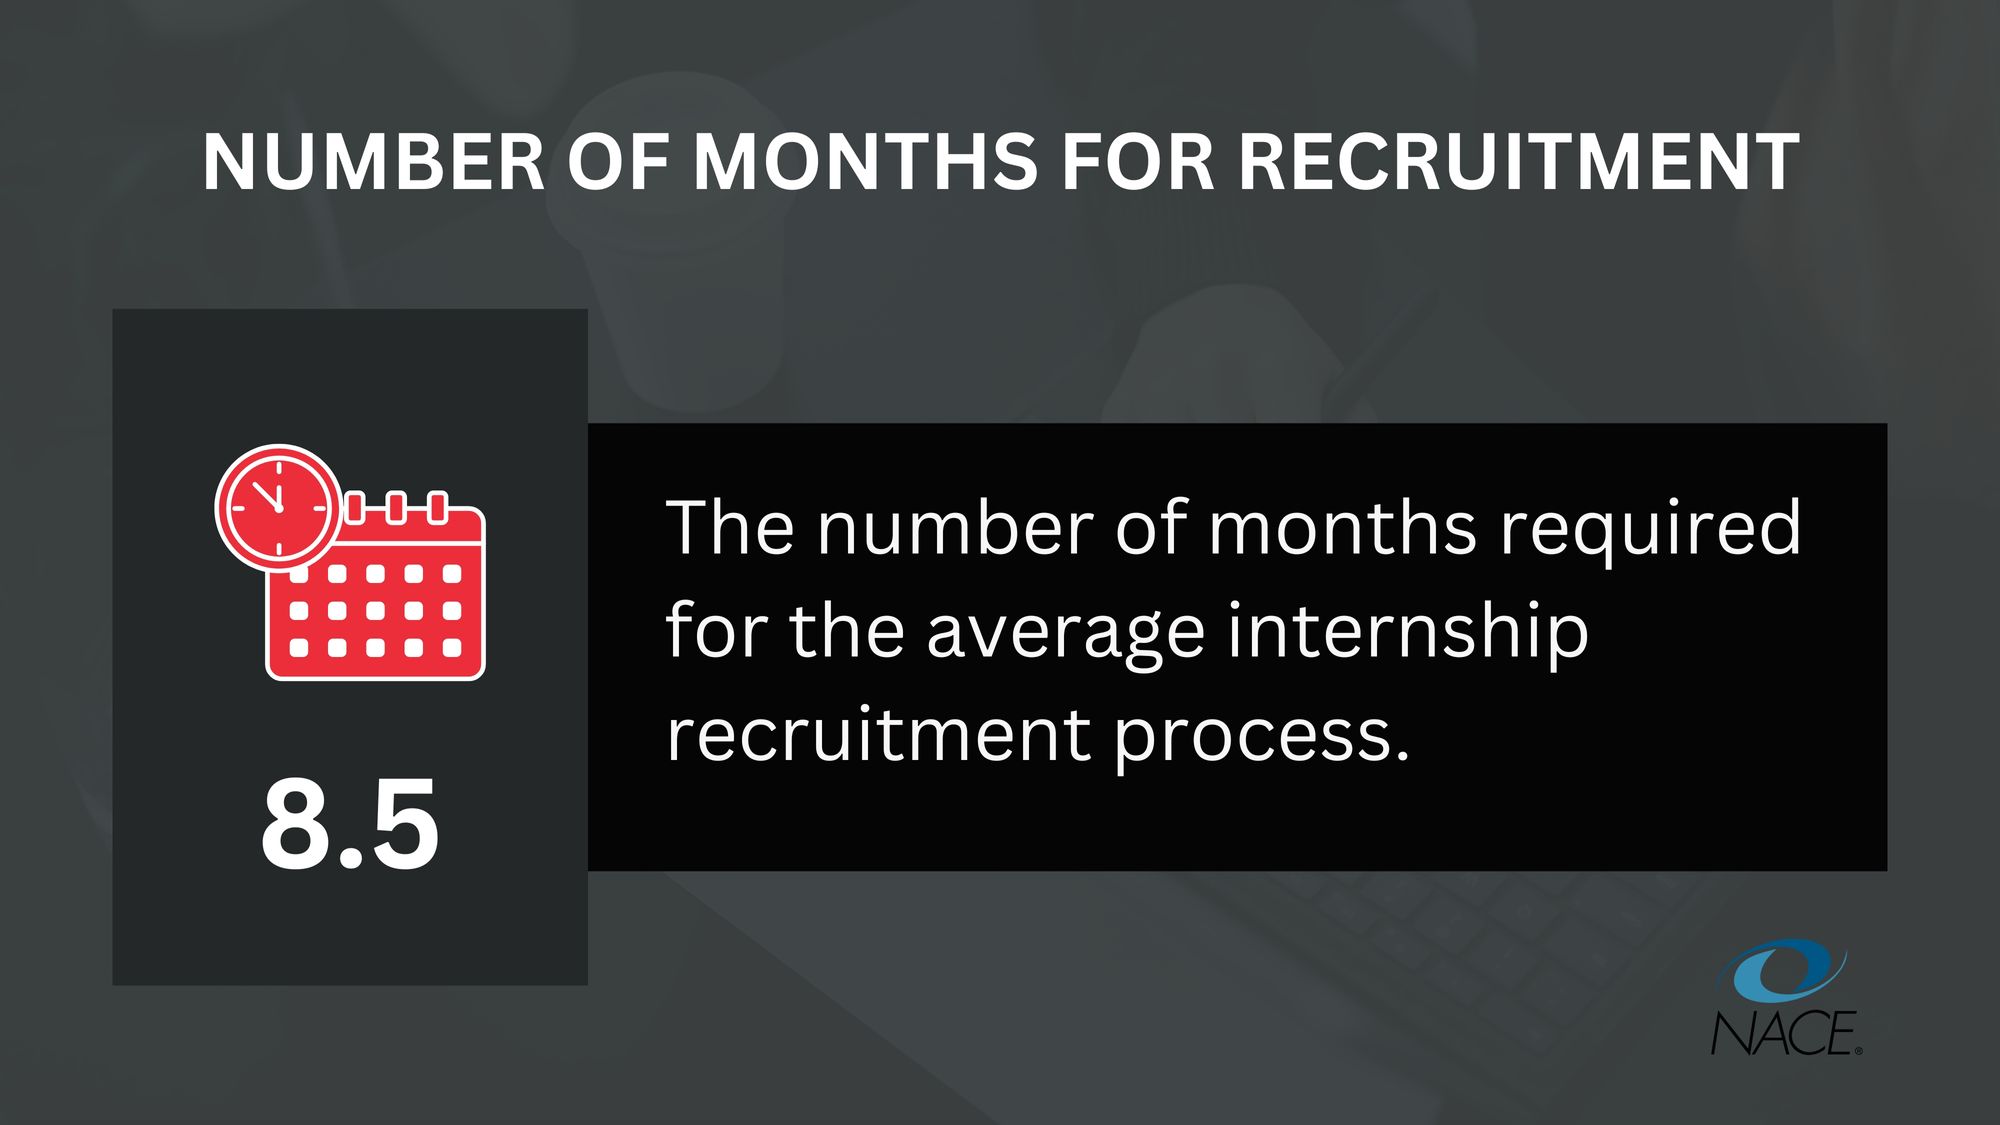 Infographic showing the average internship recruitment process lasts for 8.5 months.